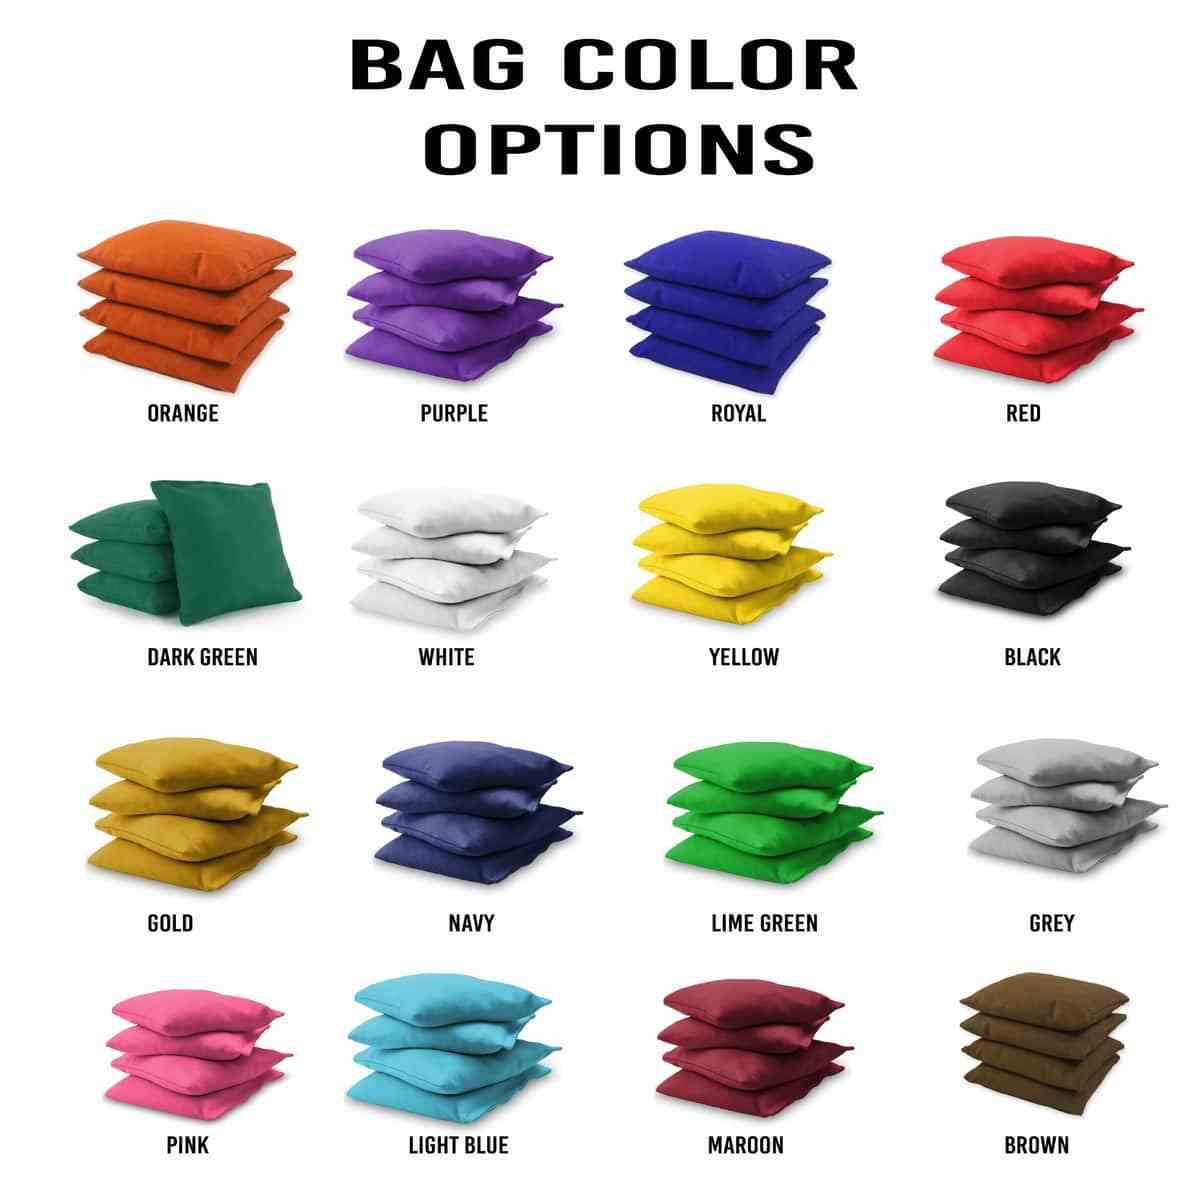 Casual Outdoors 2x4 bag colors